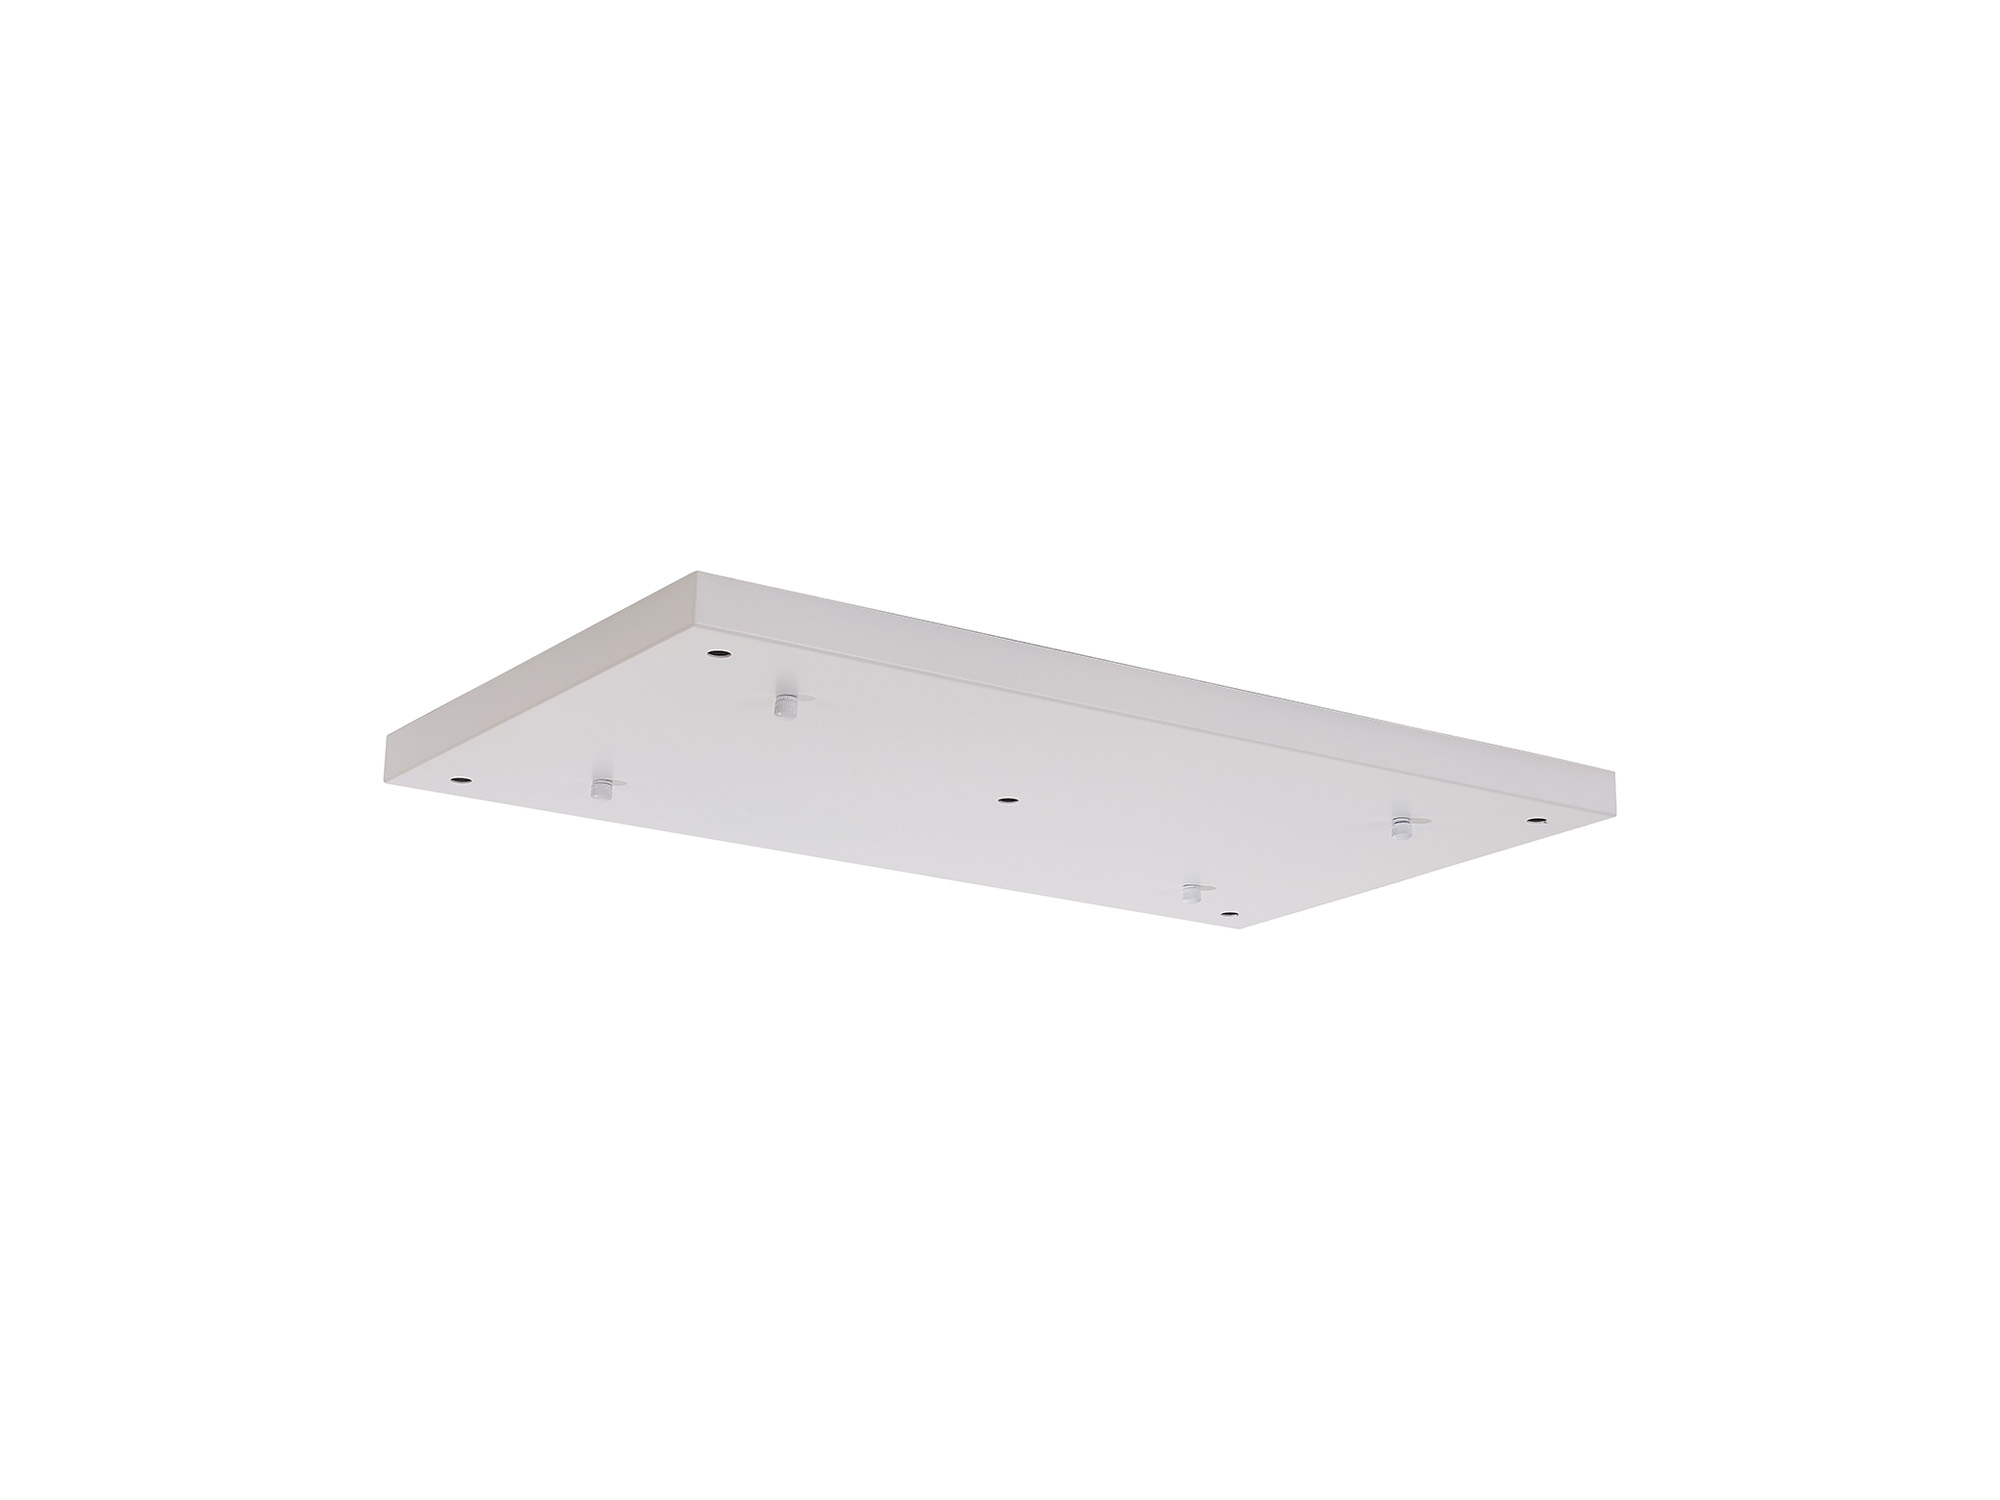 D0887WH  Hayes 5 Hole 550mm x 320mm Ceiling Plate White